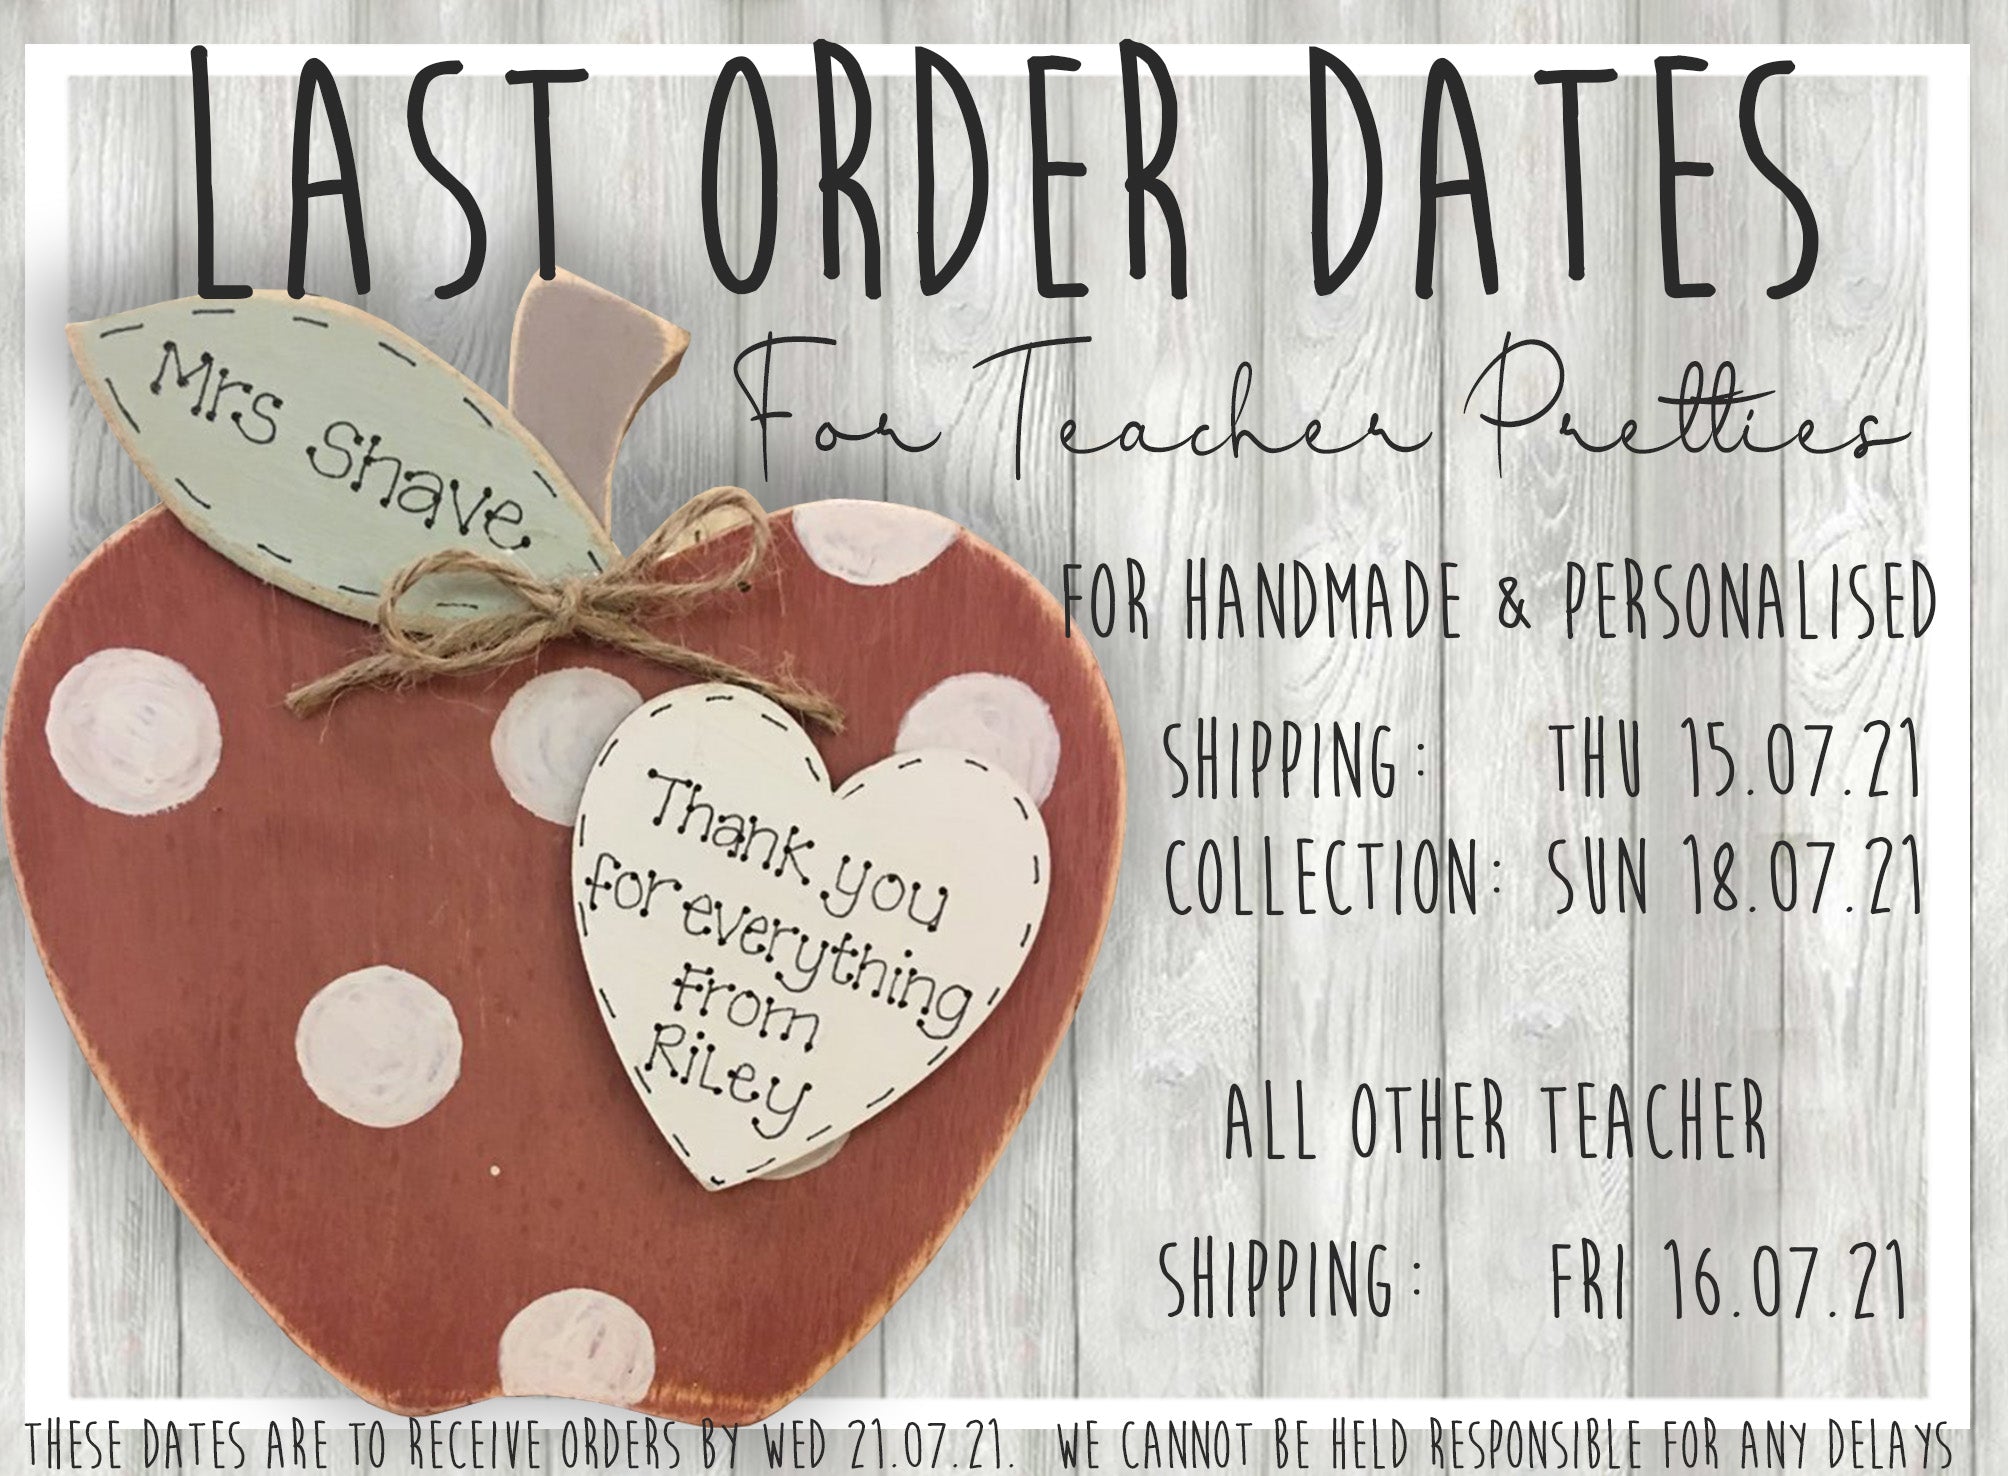 LAST ORDERS FOR TEACHER GIFTS!